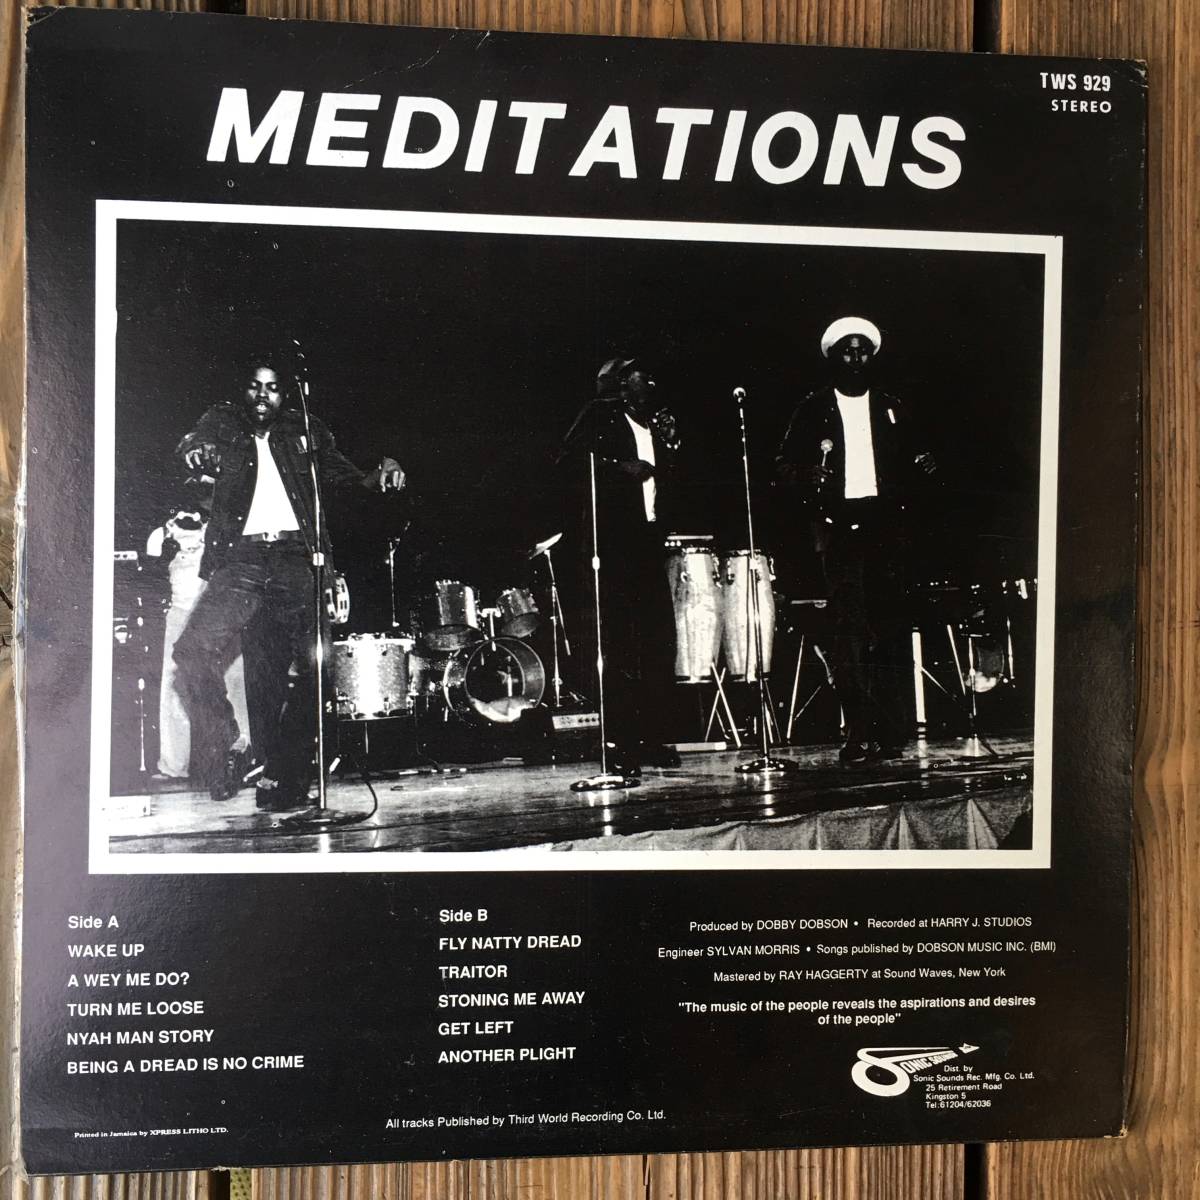 * postage included!1977!Roots Rock Vocal masterpiece![The Meditations - Wake Up]LP!Sonic Sounds TWS 929 JA Repress!Produced by Dobby Dobson